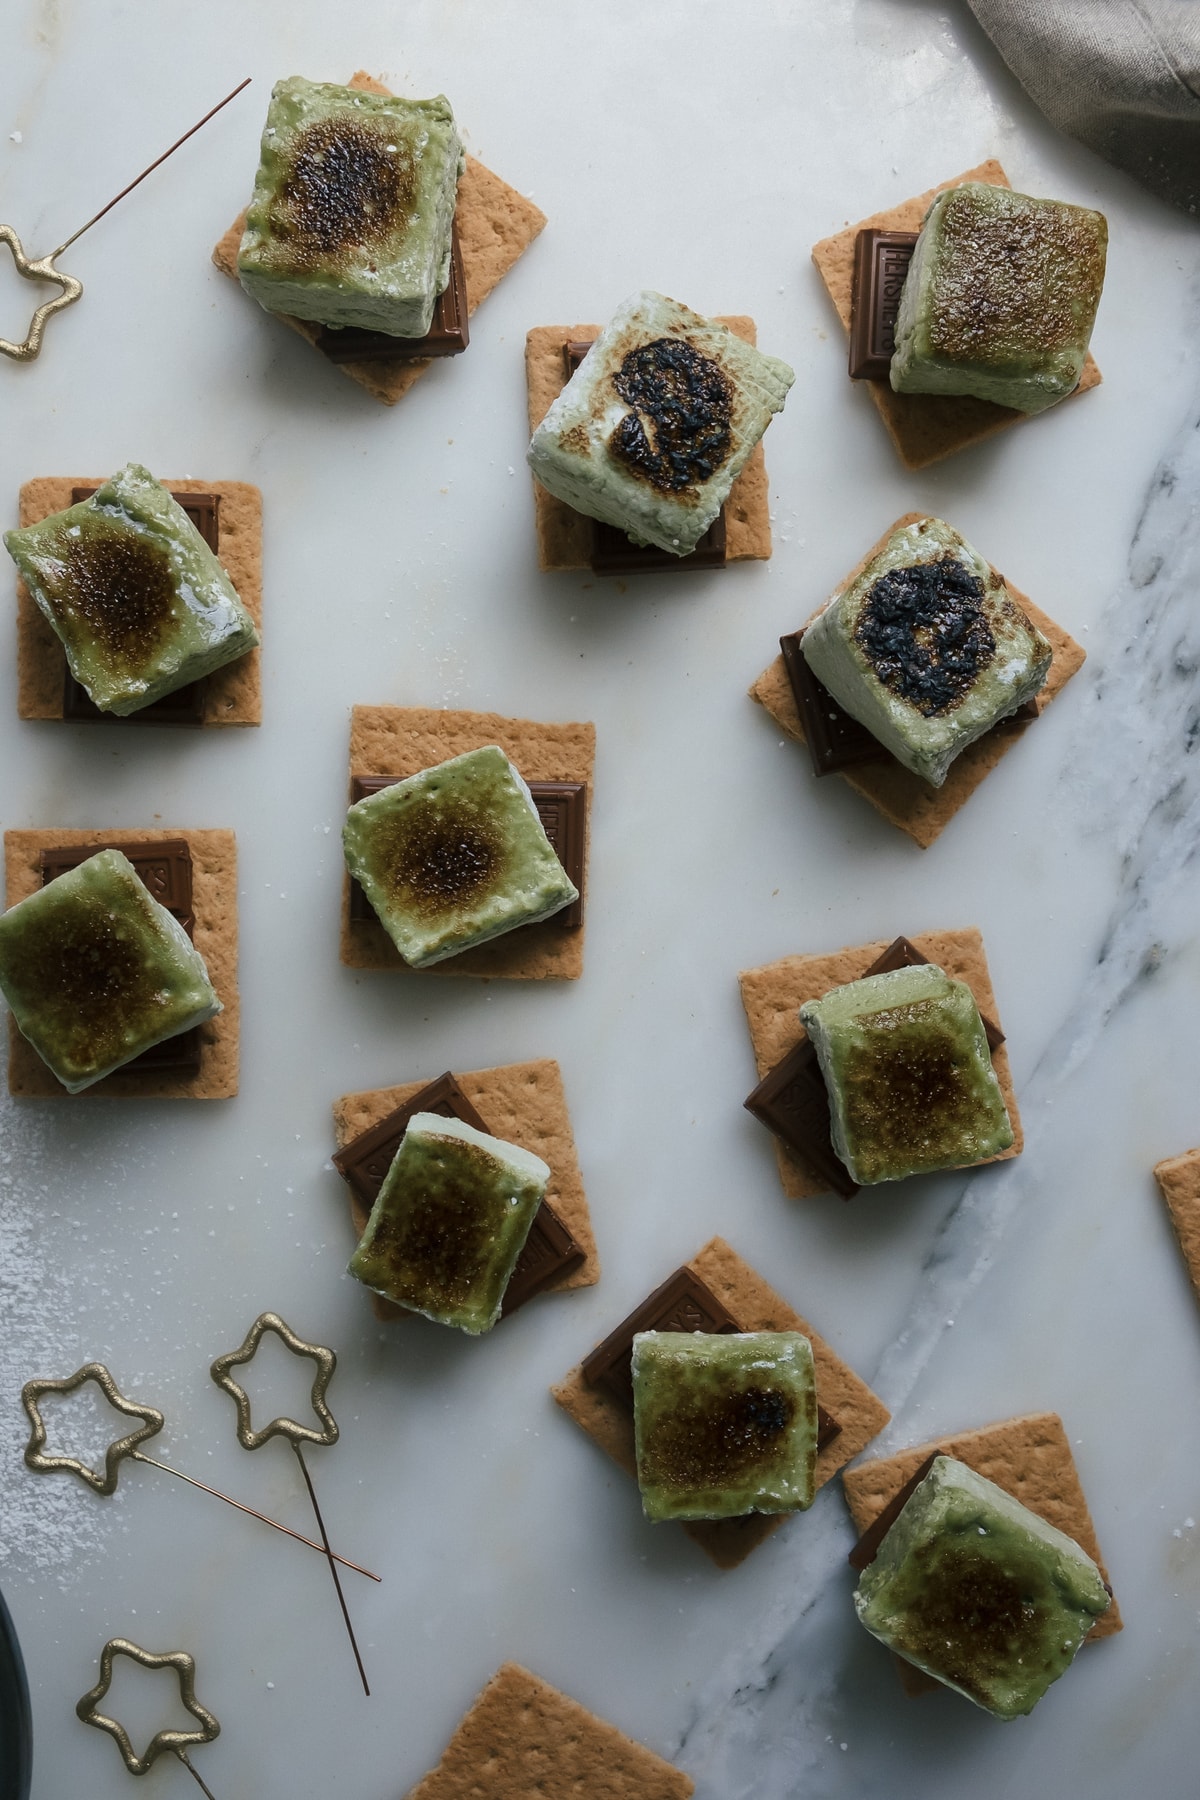 Homemade matcha marshmallows make up these Matcha S’mores for this unexpected St. Patrick's Day dessert from A Cozy Kitchen.